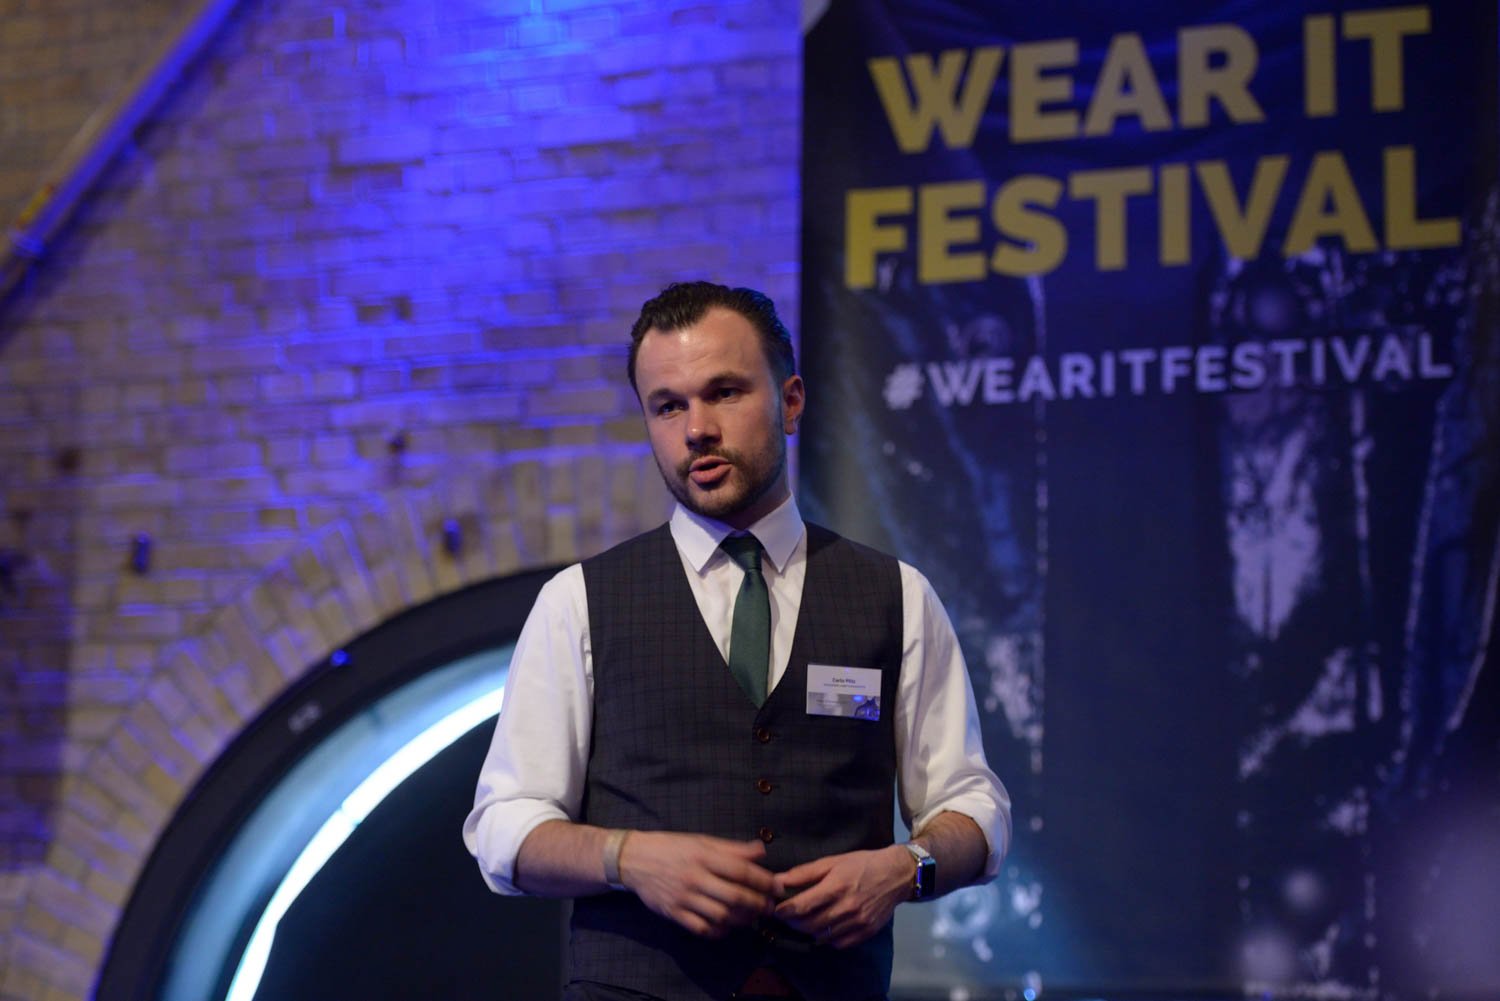 Carlo Pilz from Reuschlaw "Watch your wearable date: GDPR & the Data your smart cloth create" at Wear It Festival - The Conference on Wearables, fashion tech, smart clothing and consumer innovation on 19-20 June 2018 at the Kulturbrauerei Berlin -  (c) Wear It Berlin / Michael Wittig, Berlin